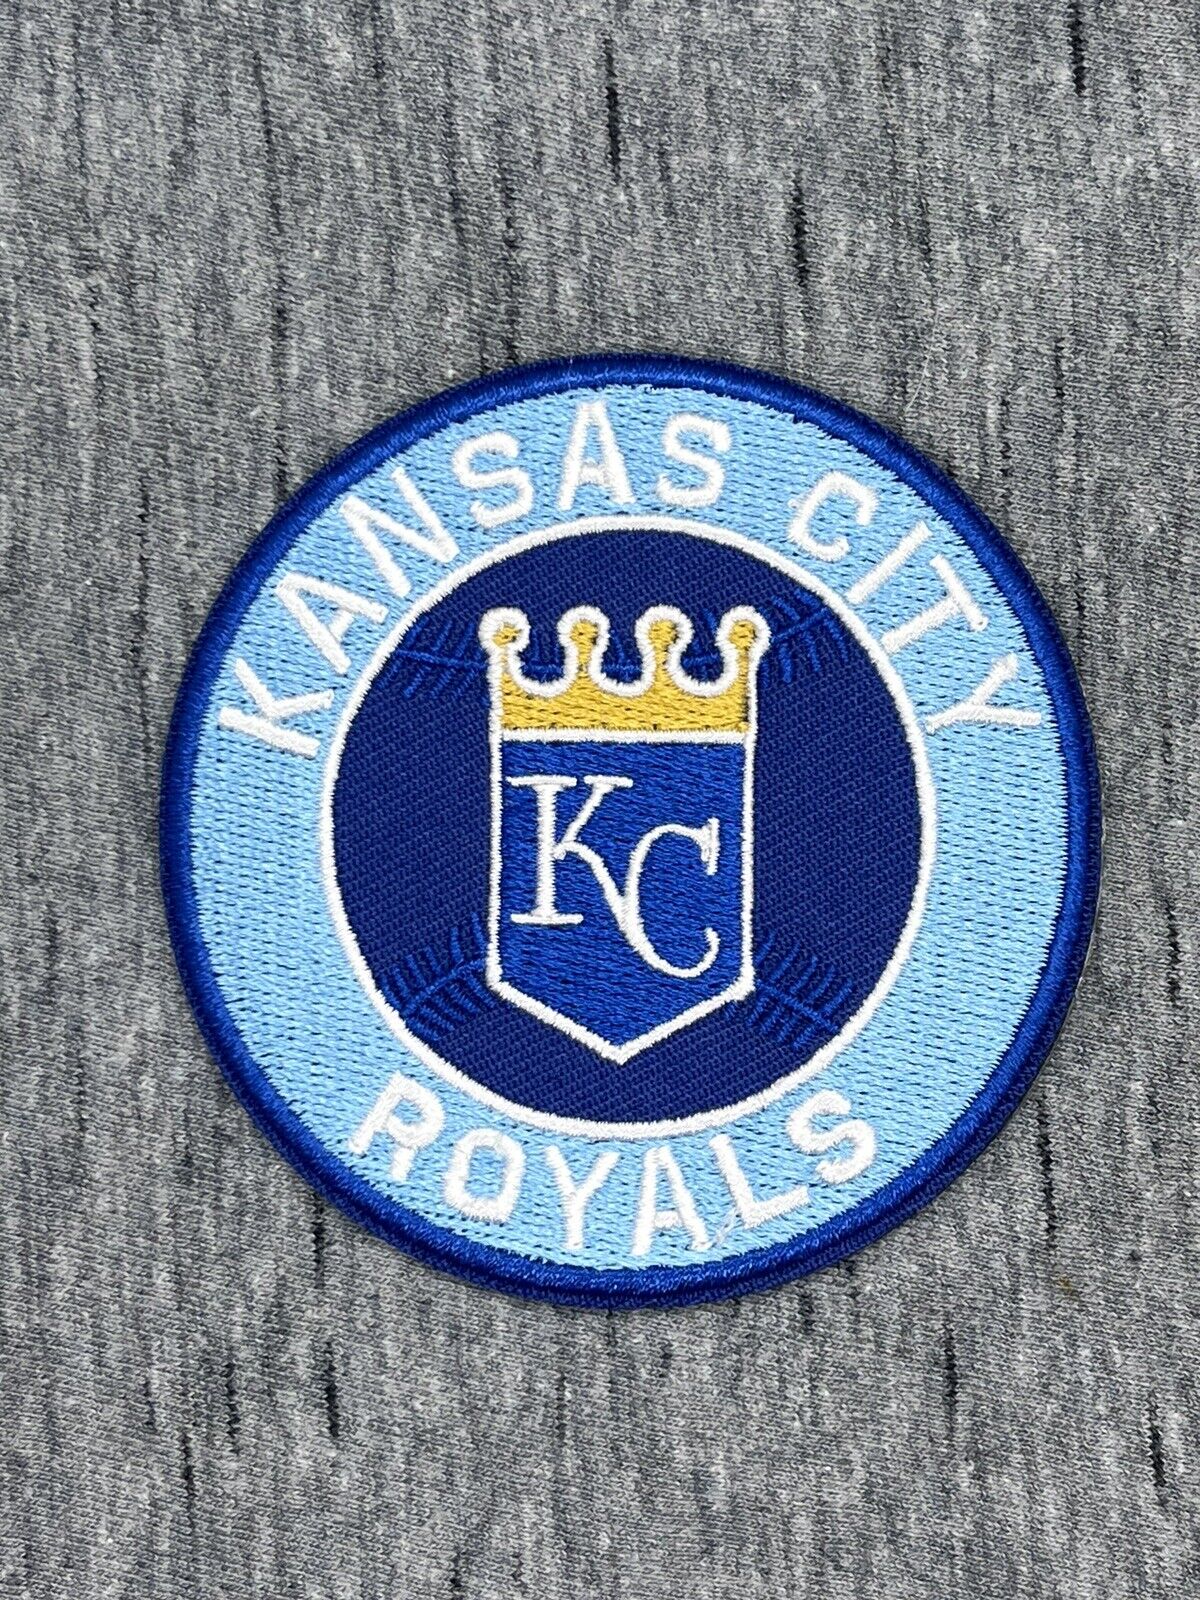 KANSAS CITY ROYALS EMBROIDERED IRON ON PATCH APPROX. 3” DIAMETER 